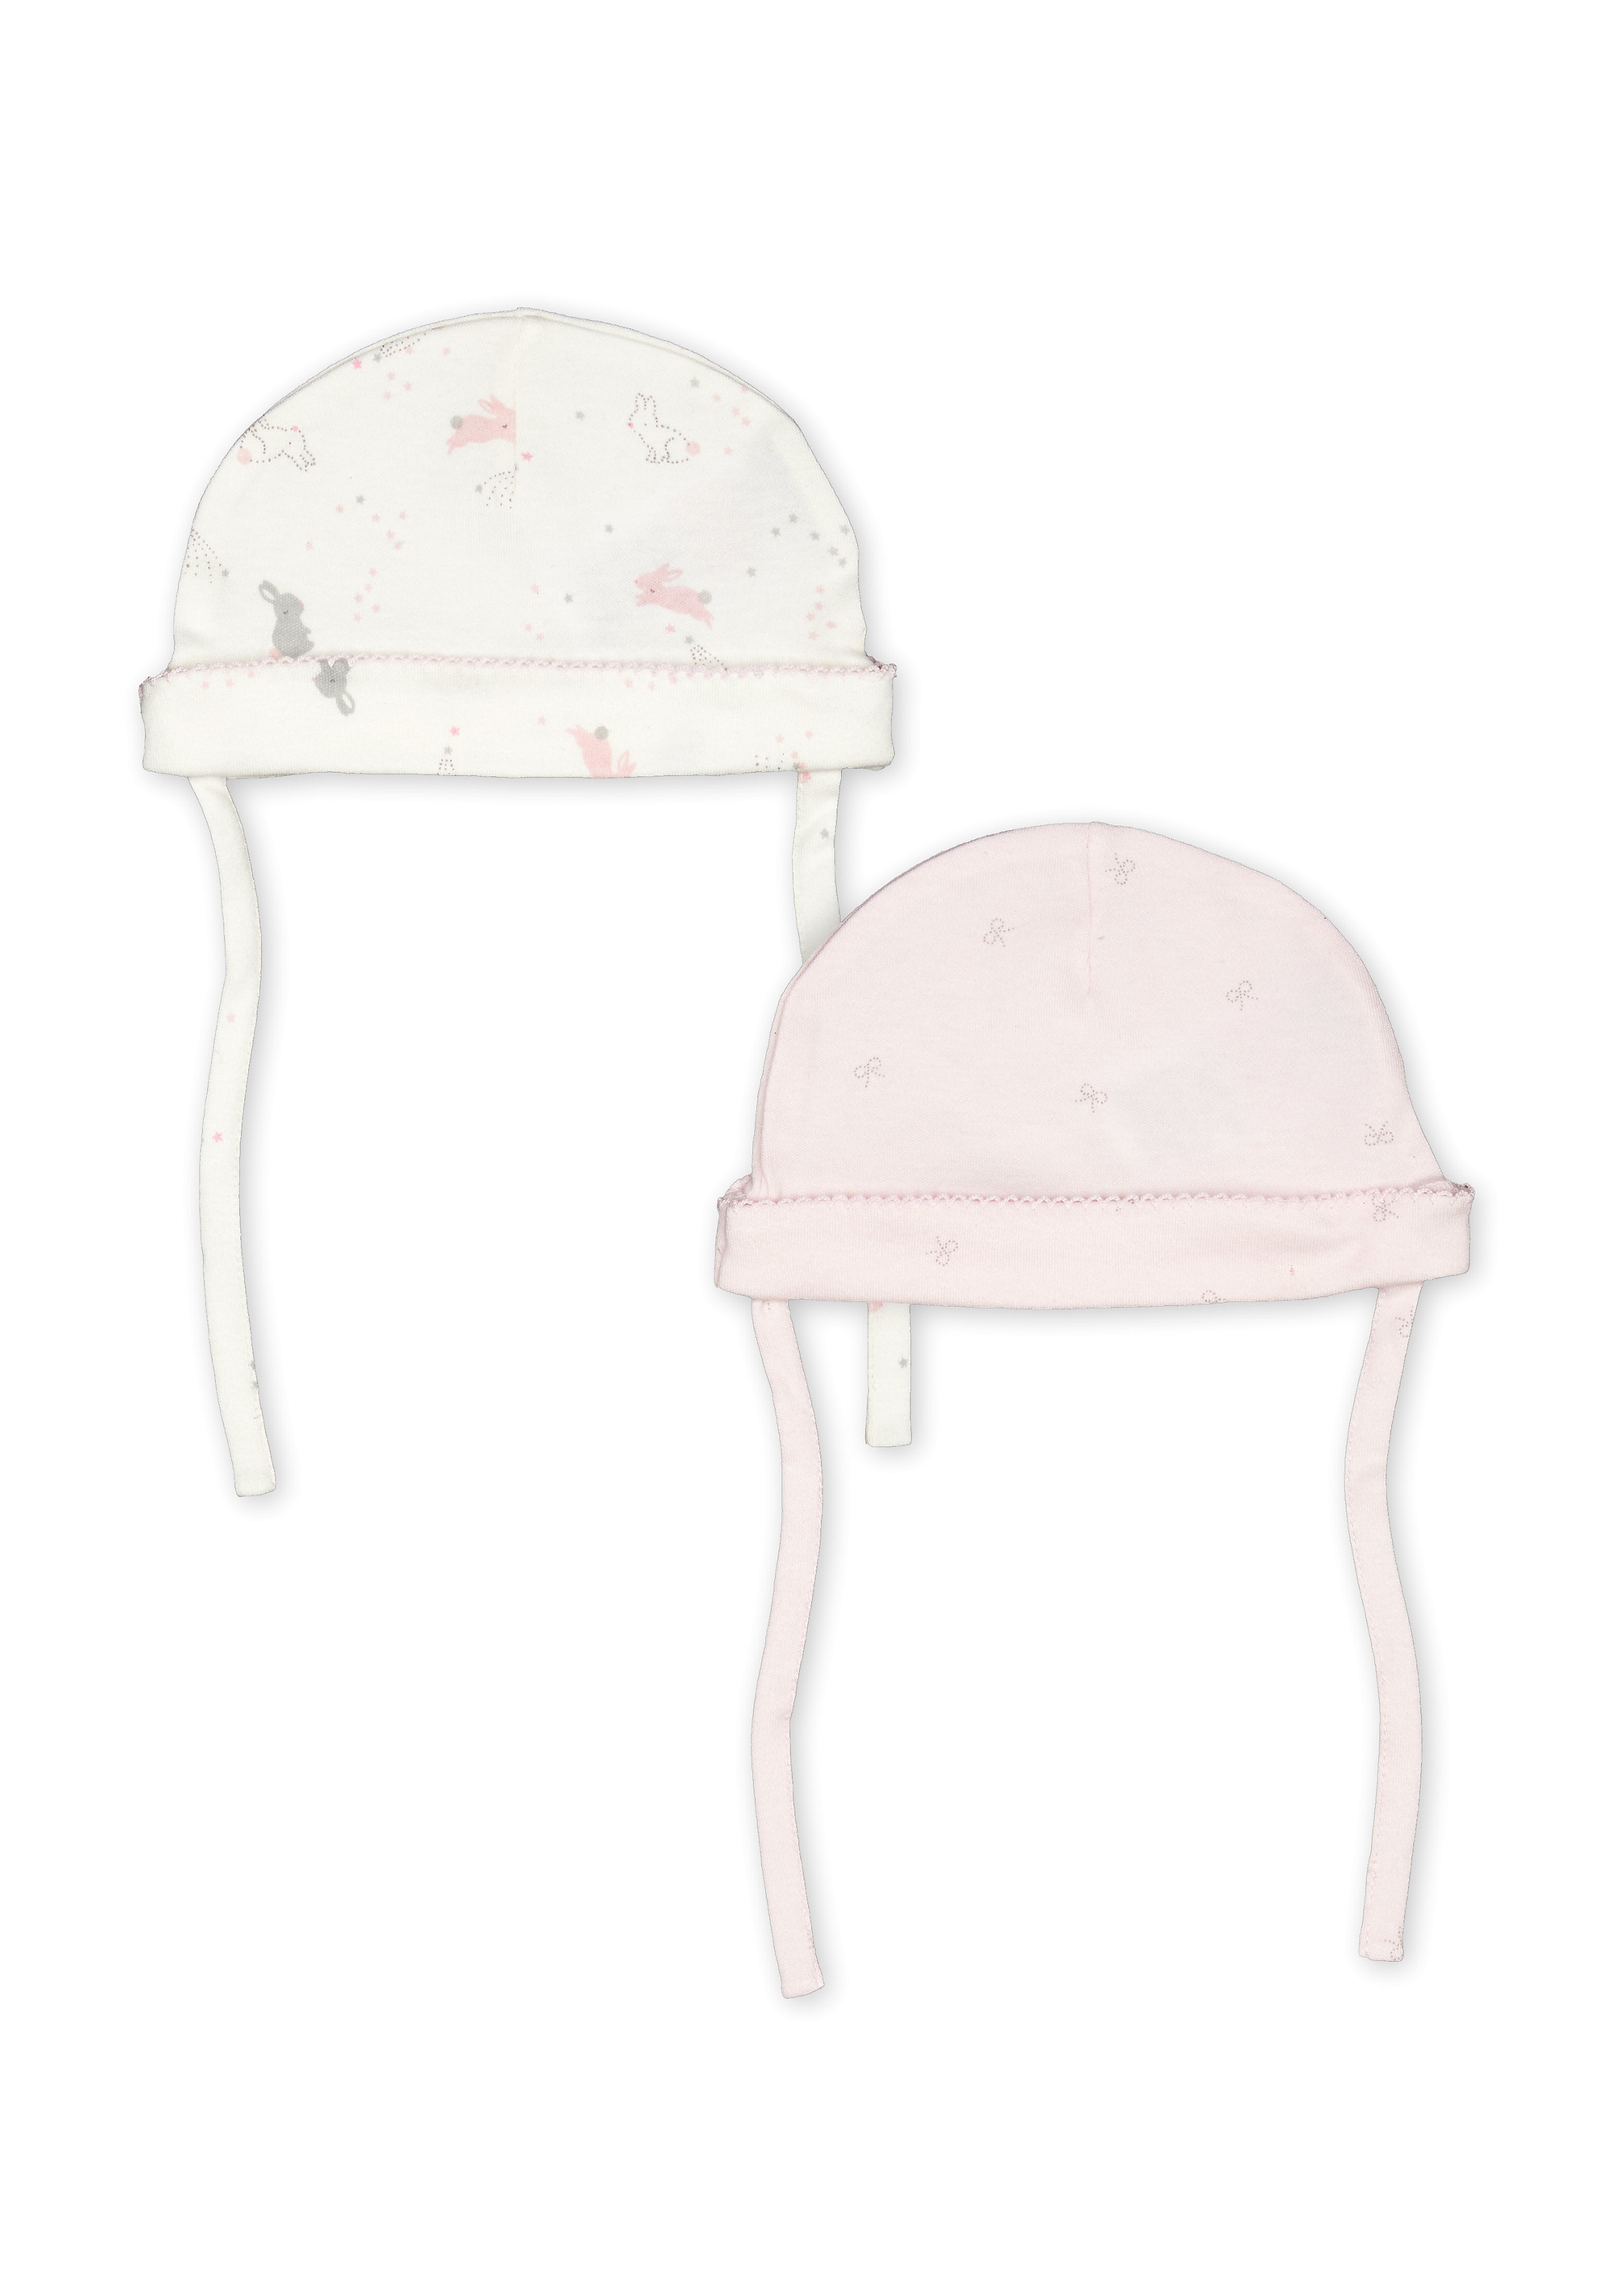 Girls Printed Hat - Pack Of 2 - Pink White